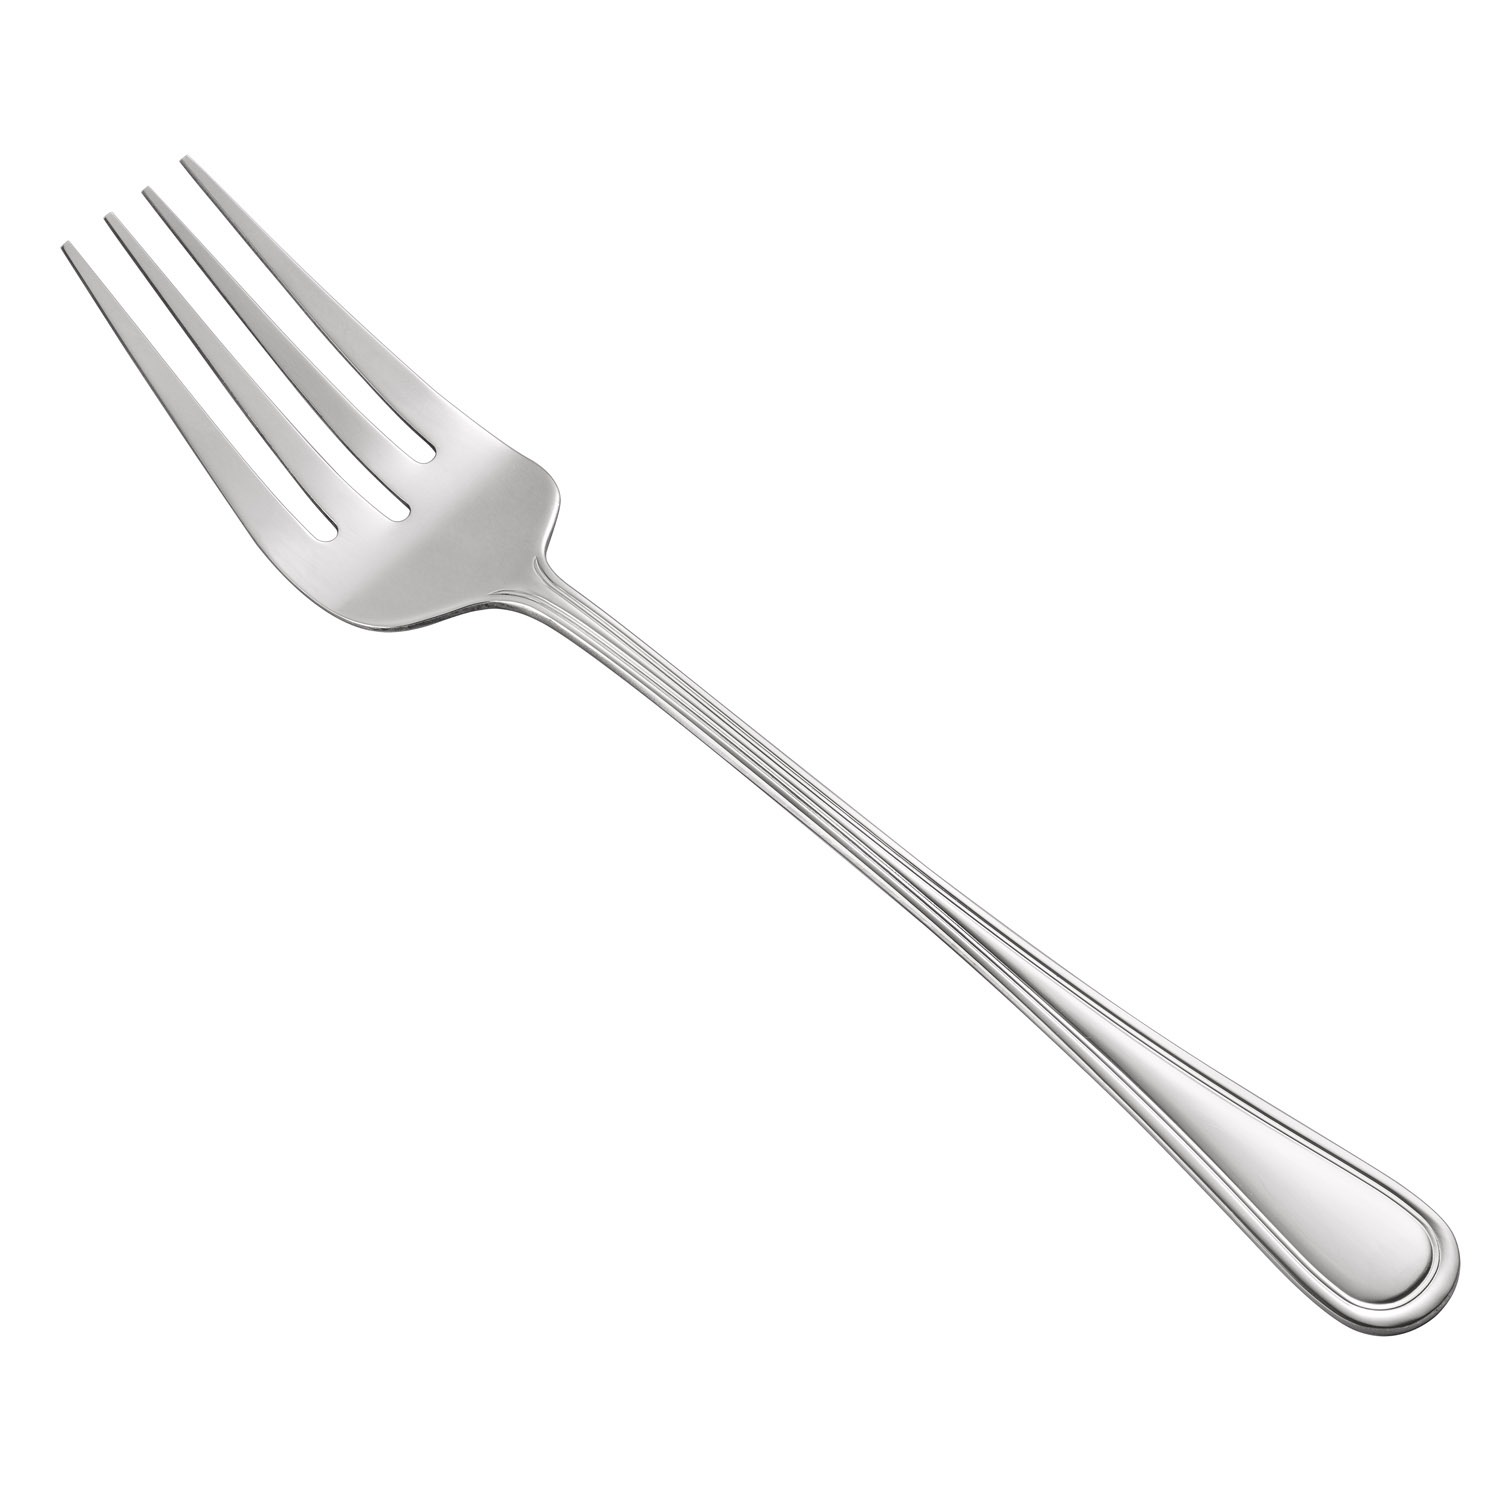 CAC China 8002-21 Elite Banquet Fork, Extra Heavyweight 18/8, 12"